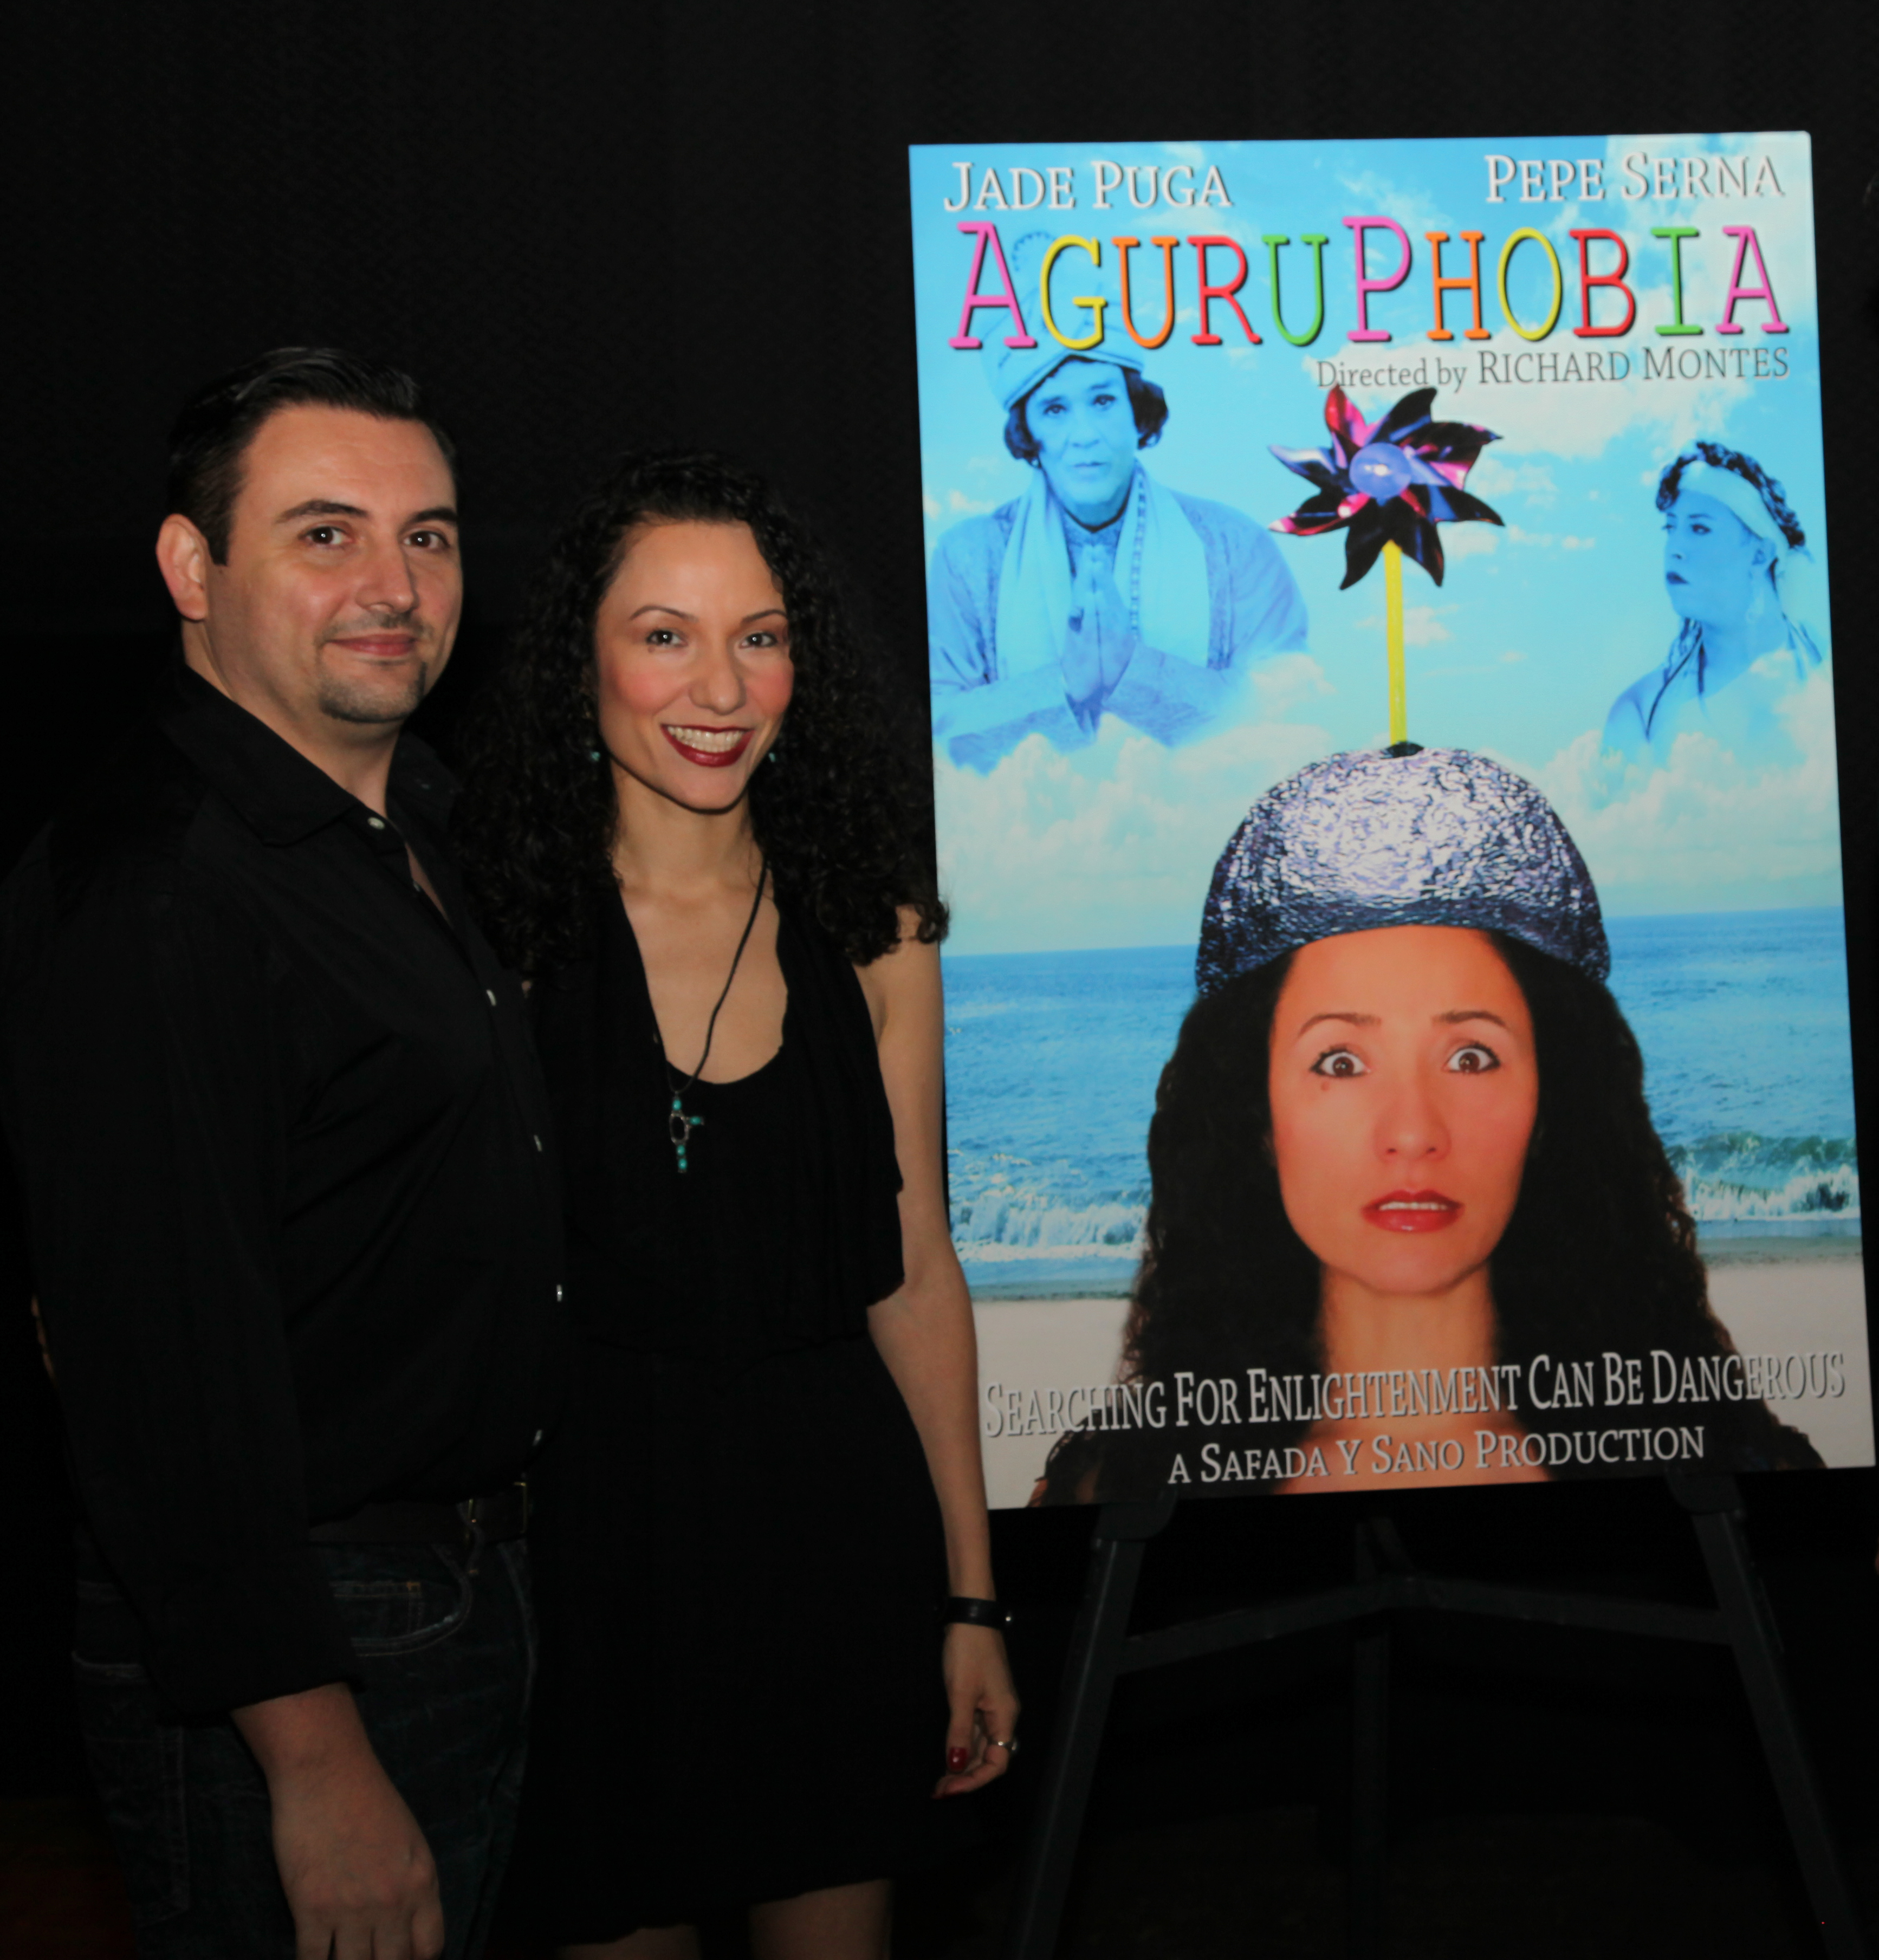 At the Los Angeles Premiere of my film Aguruphobia with the lead of the movie and producer Jade Puga.